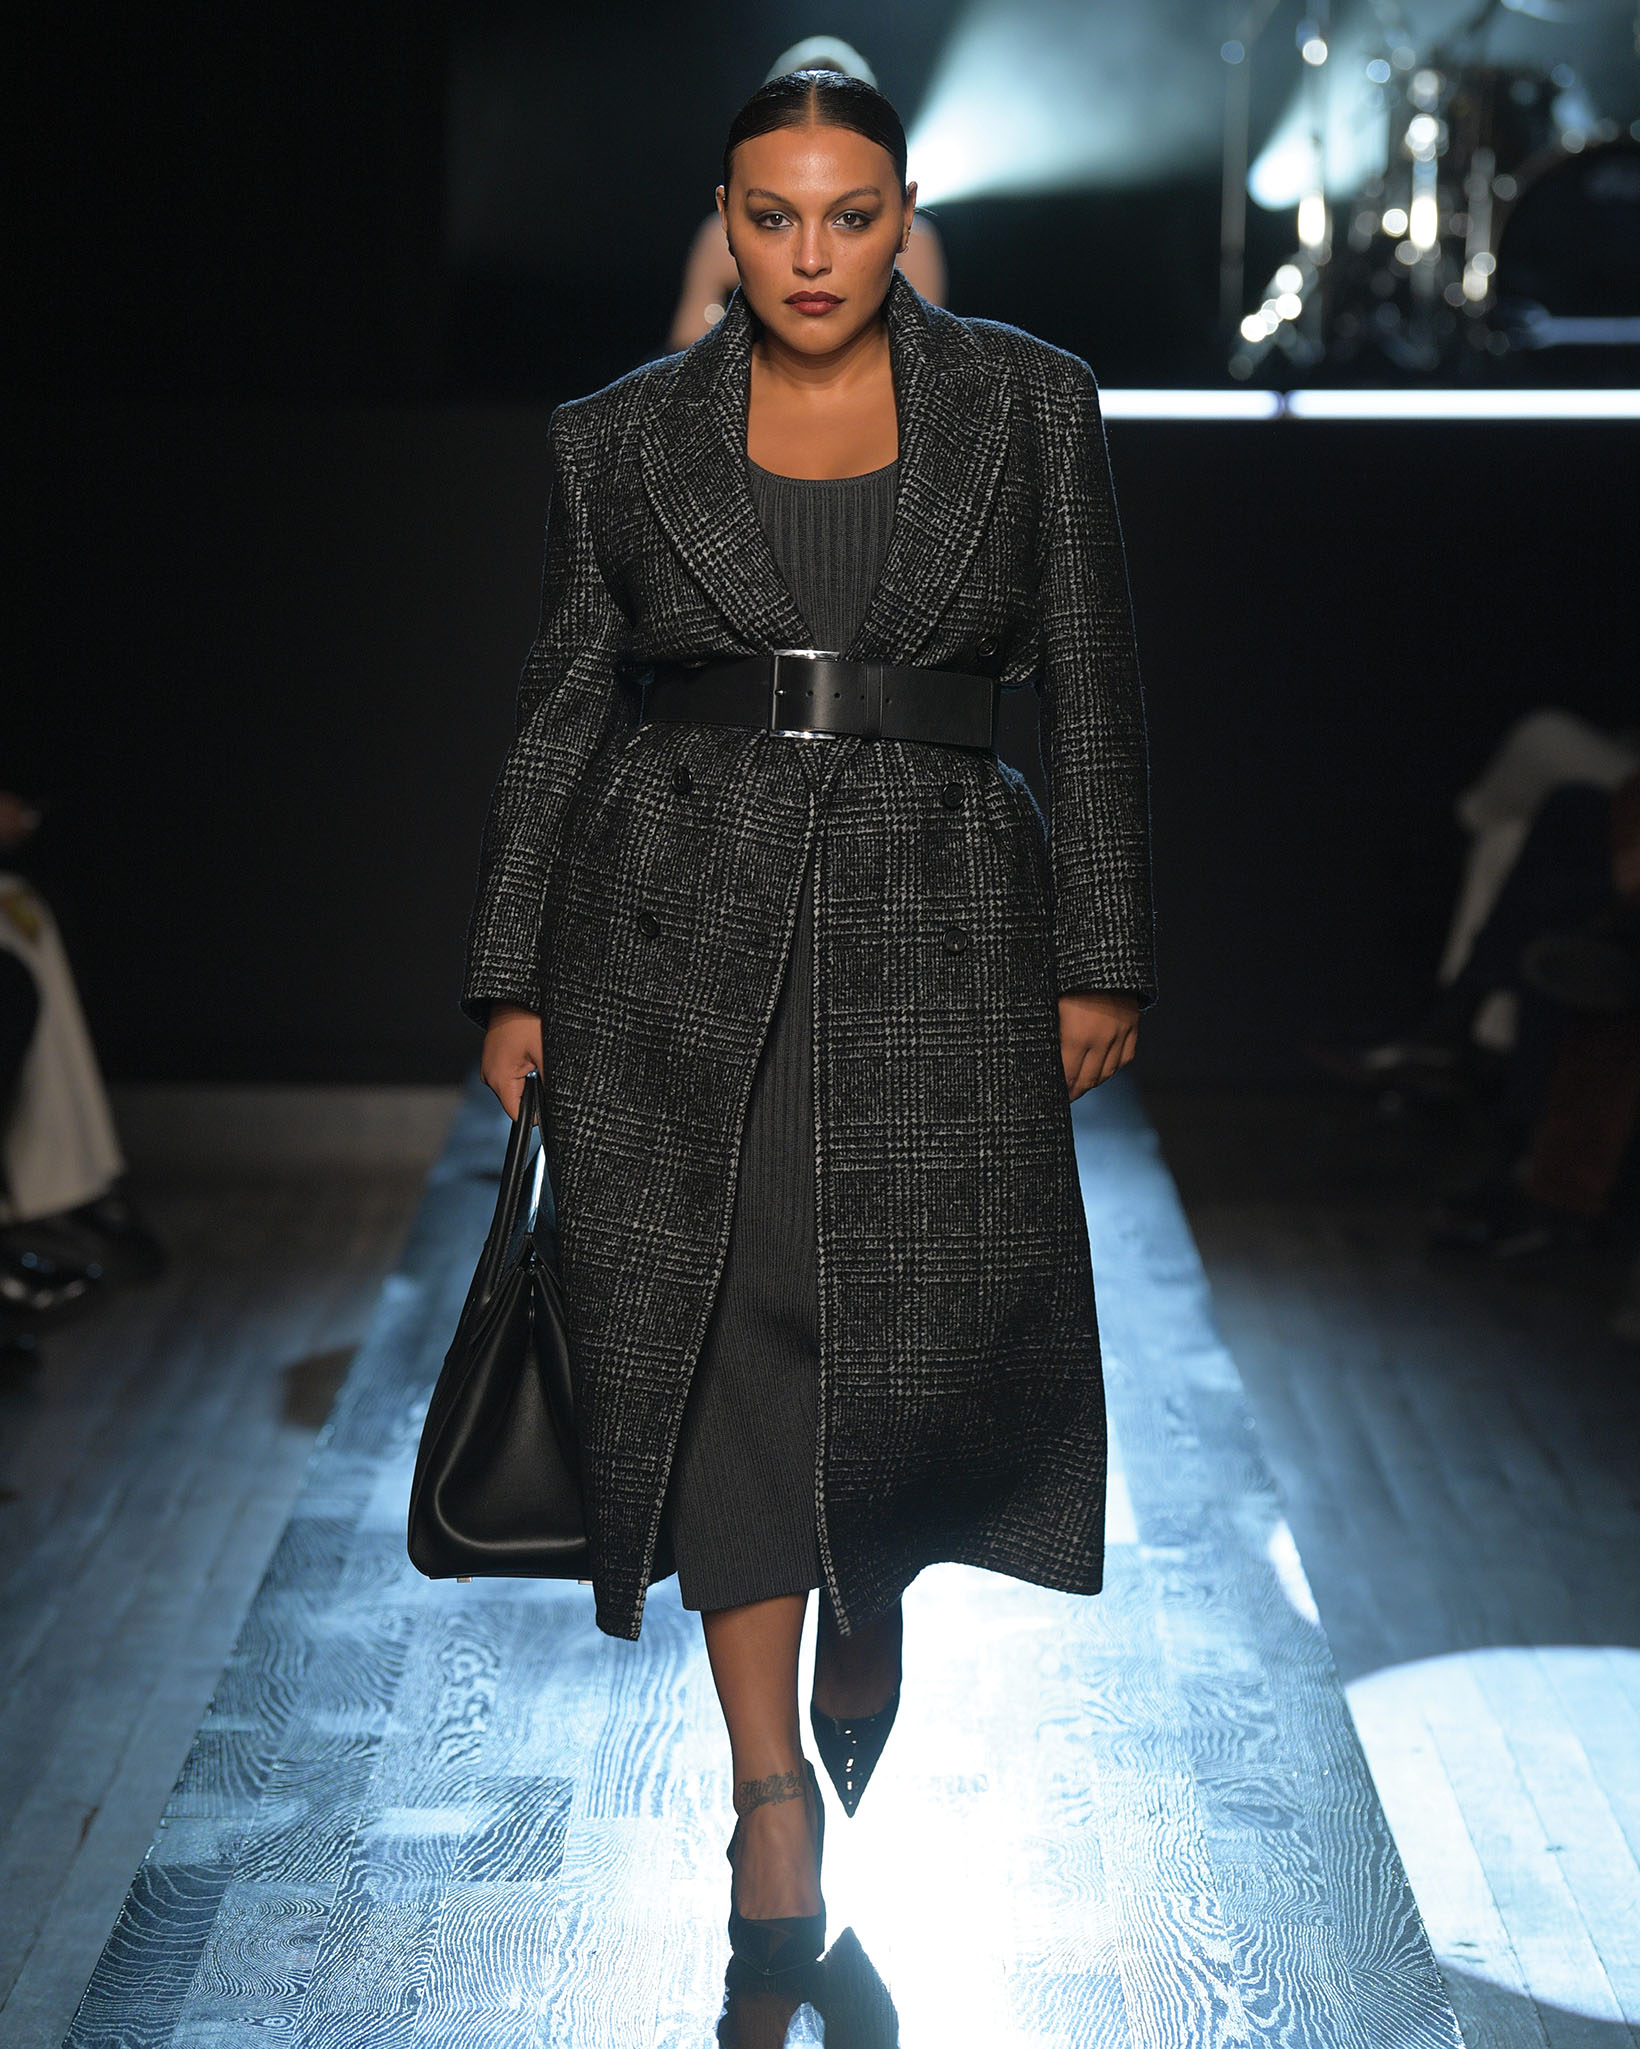 Michael Kors Collection At NYFW An Ode To Nightlife And New York